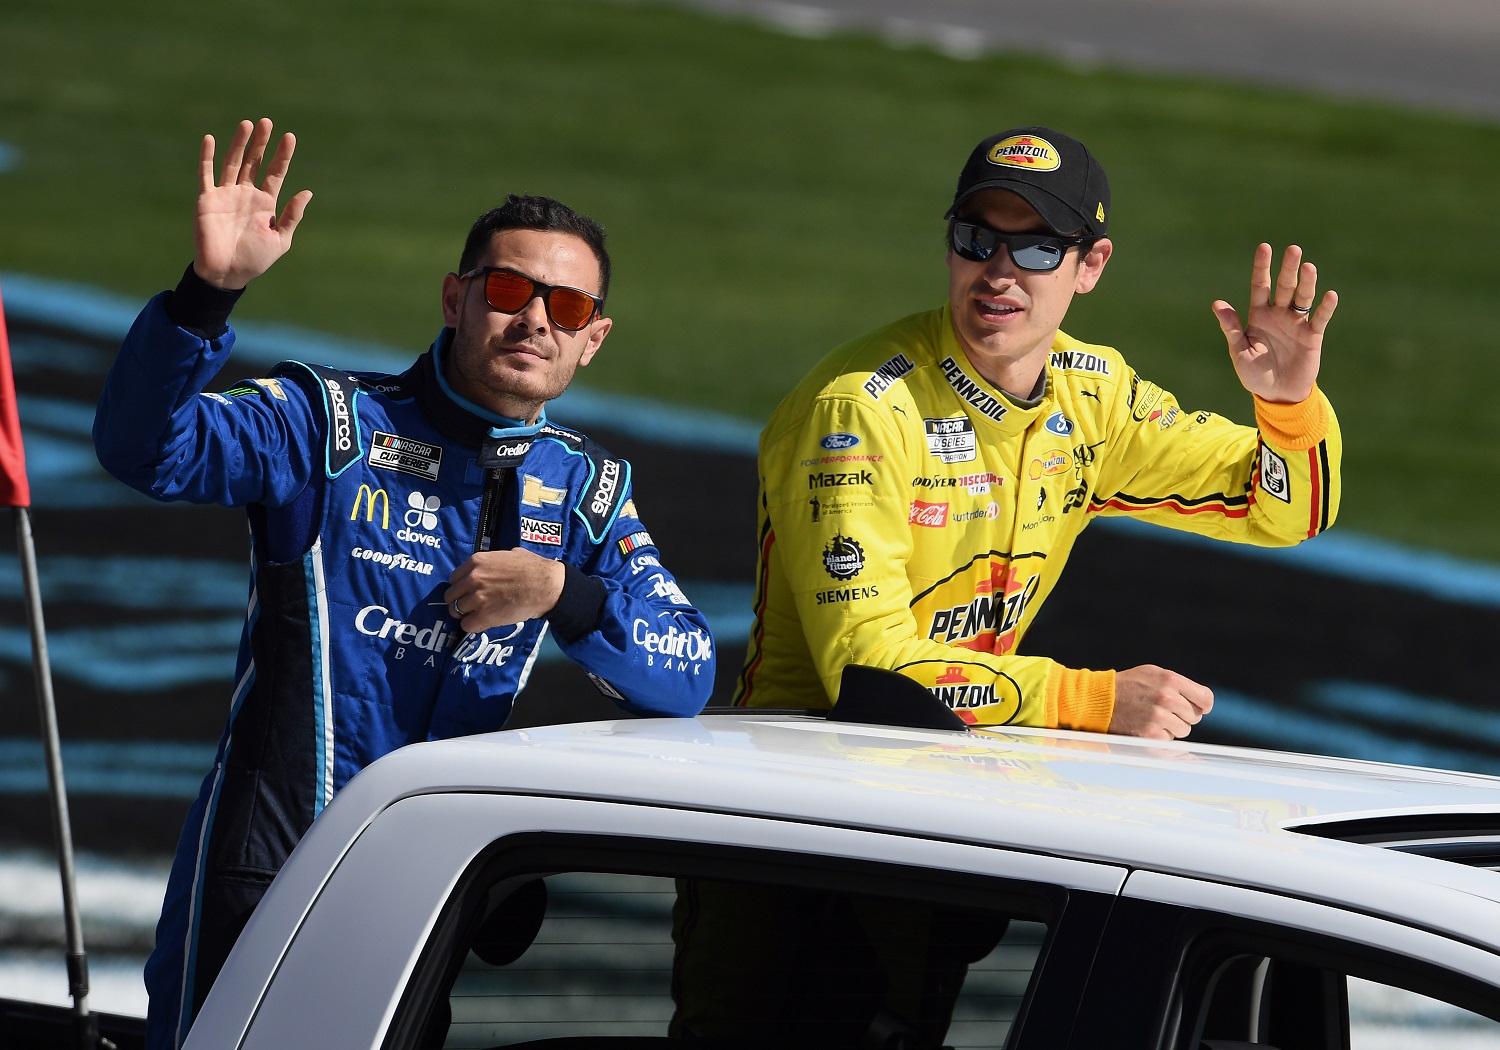 NASCAR Cup Series drivers Kyle Larson  and Joey Logano wave to the fans during a parade lap before the Pennzoil 400 on Feb. 23, 2020, at Las Vegas Motor Speedway. | John Cordes/Icon Sportswire via Getty Images